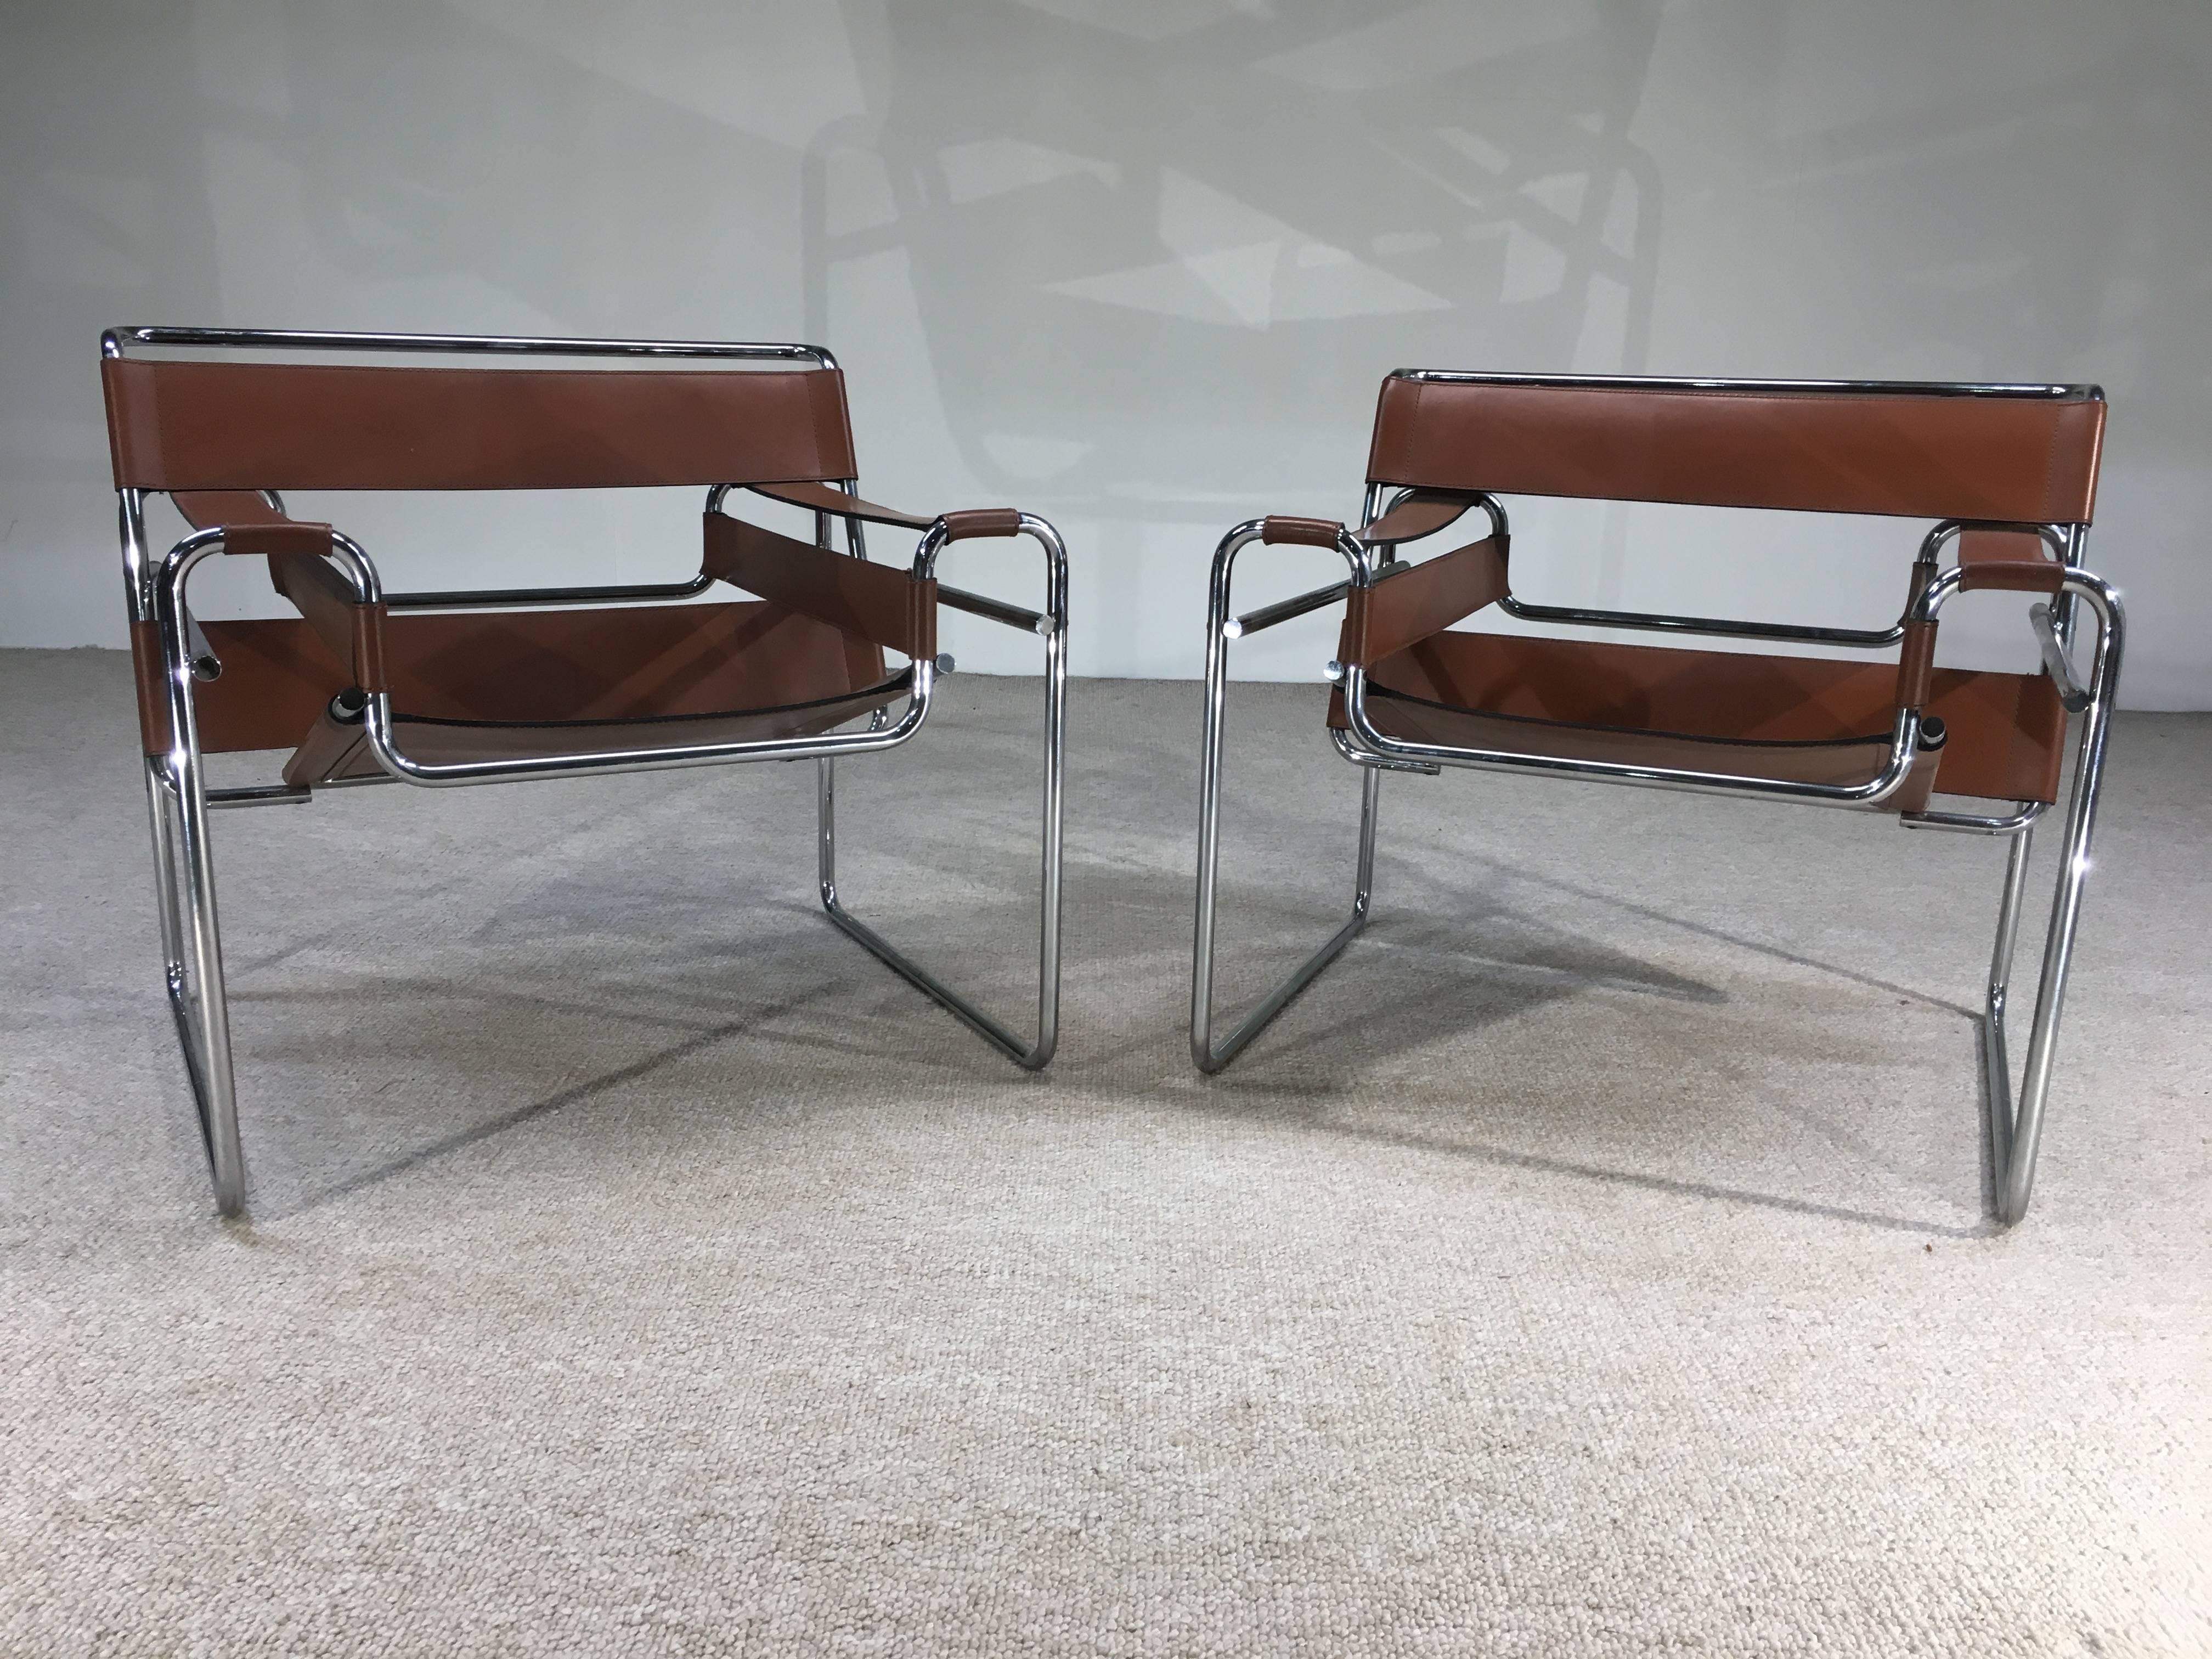 A gorgeous signed pair of Mid-Century Wassily chairs in stunning caramel leather.
Wonderful vintage condition having strong, well maintained leather and portions of the Stendig label under each. Chrome is excellent on both chairs. Ready for use!